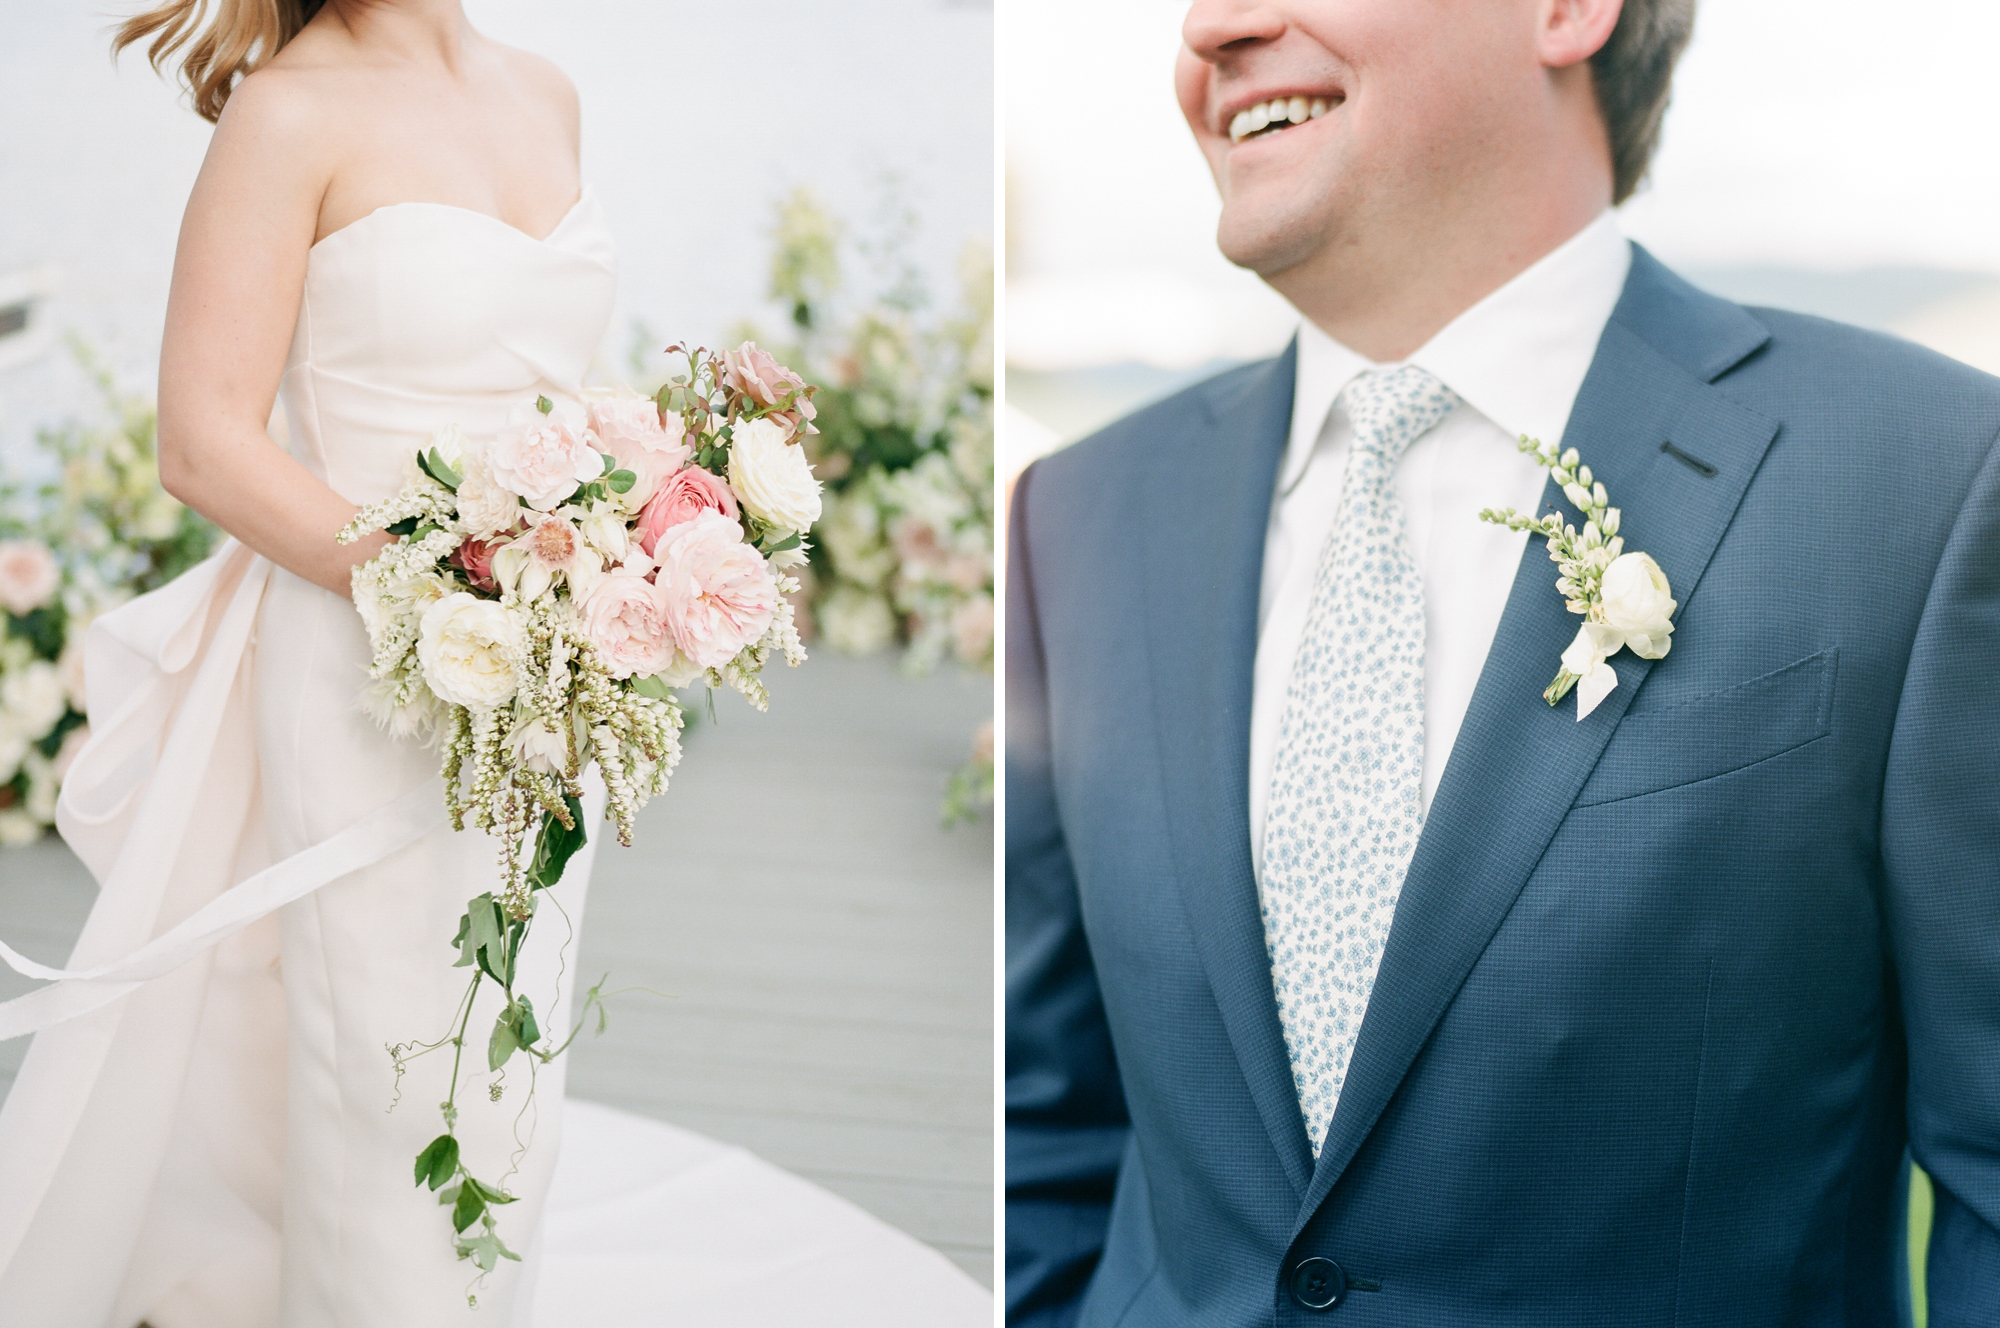 Stunning wedding bouquet and boutonniere by Bows and Arrows. Photo by Rachel Havel